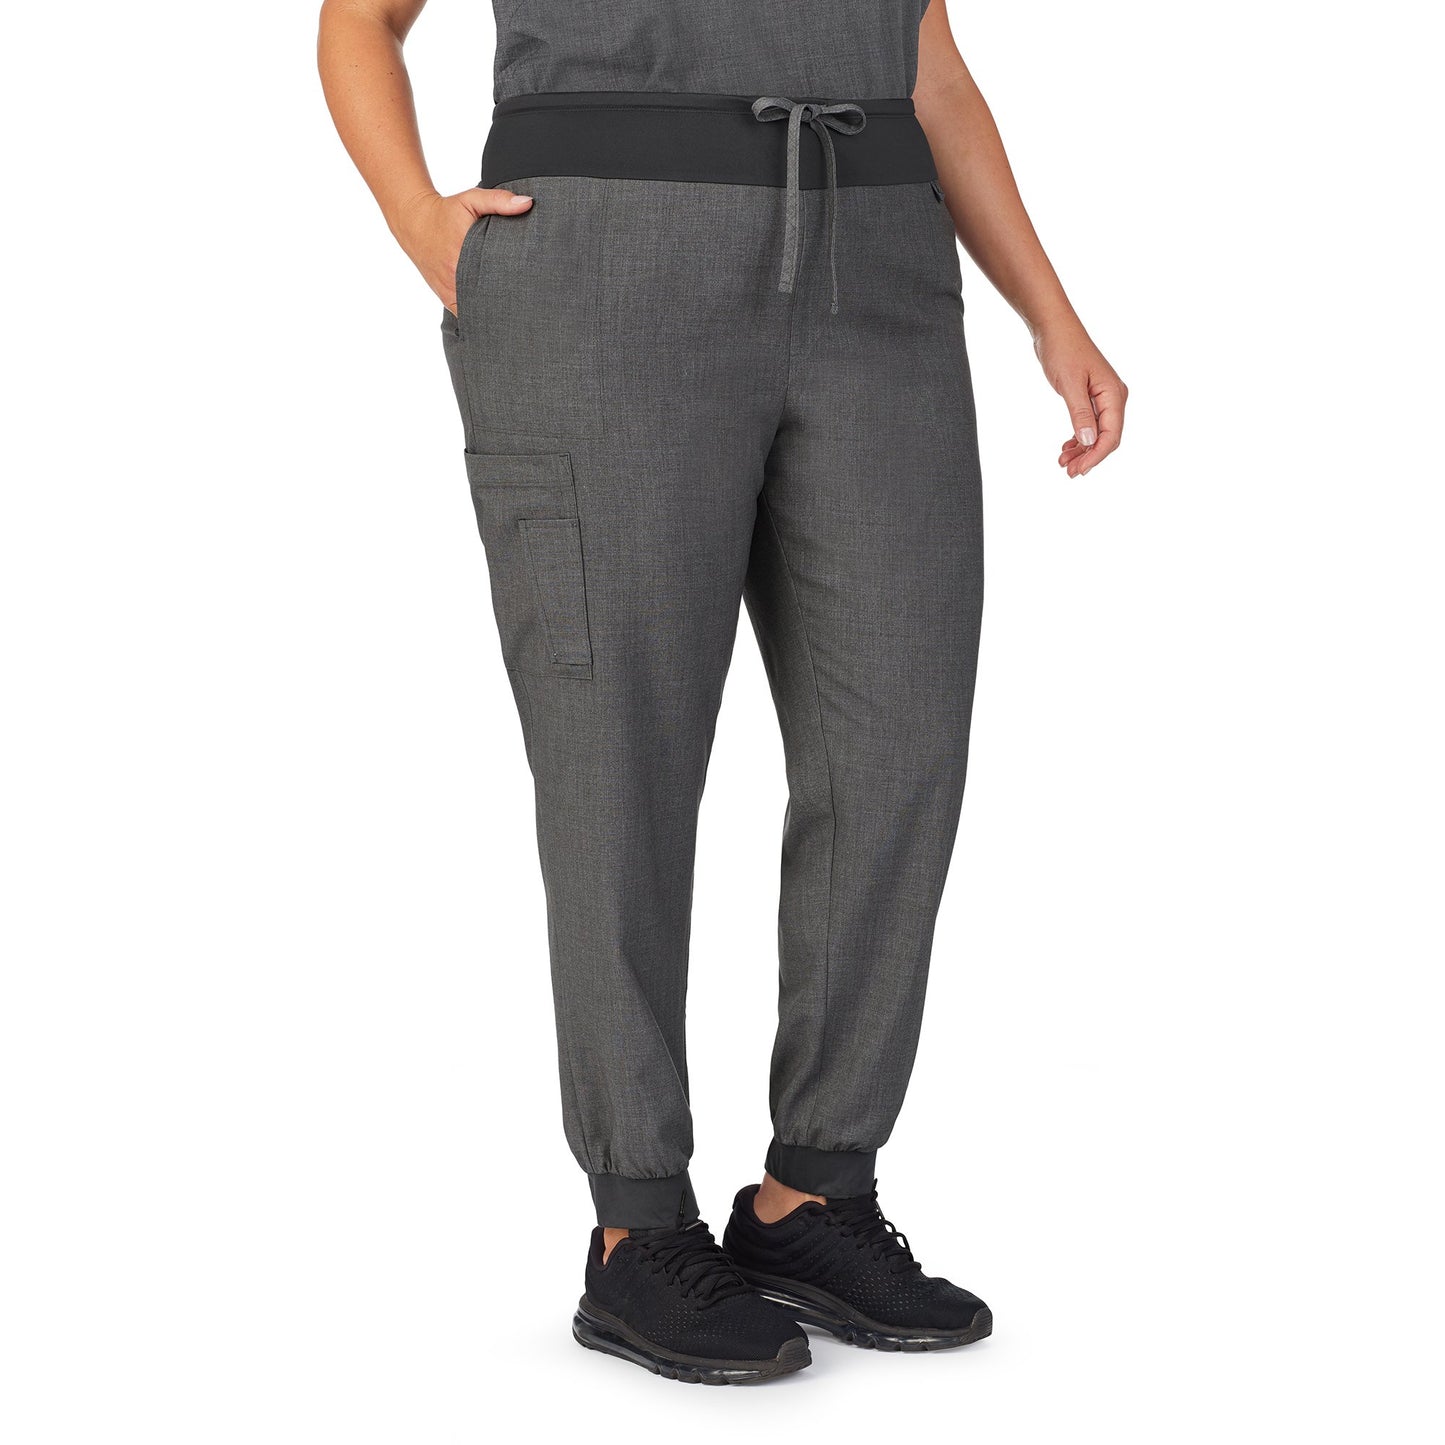 Charcoal Heather;Model is wearing size 1X. She is 5’9.5”, Bust 43”, Waist 37”, Hips 49.5”.@A lady wearing charcoal heather scrub jogger pant plus.